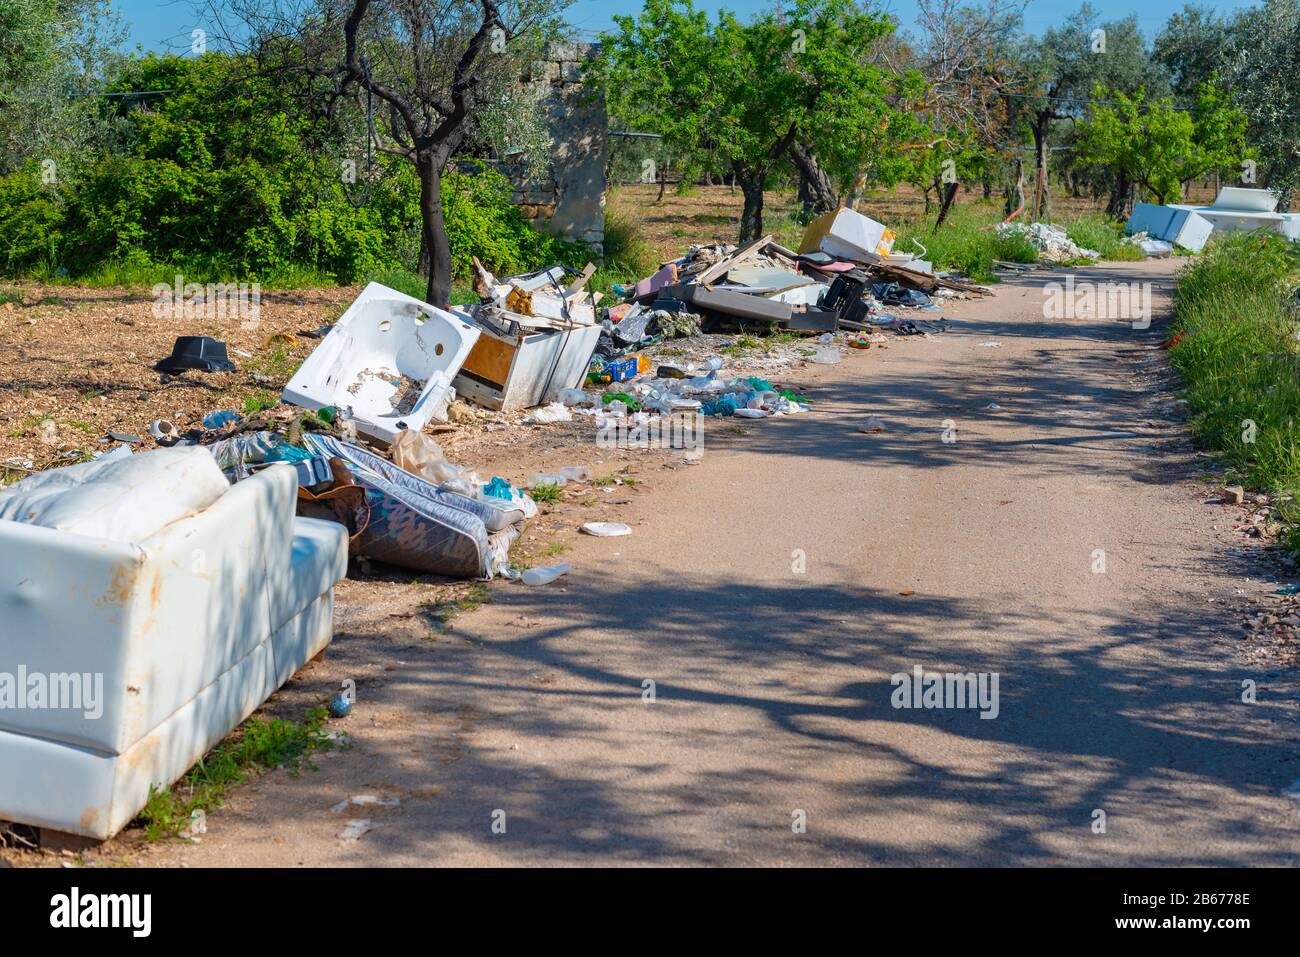 Big problem of environmental degradation. Plastic waste, non-functioning appliances and all kinds of waste left at the edge of a country road. Stock Photo